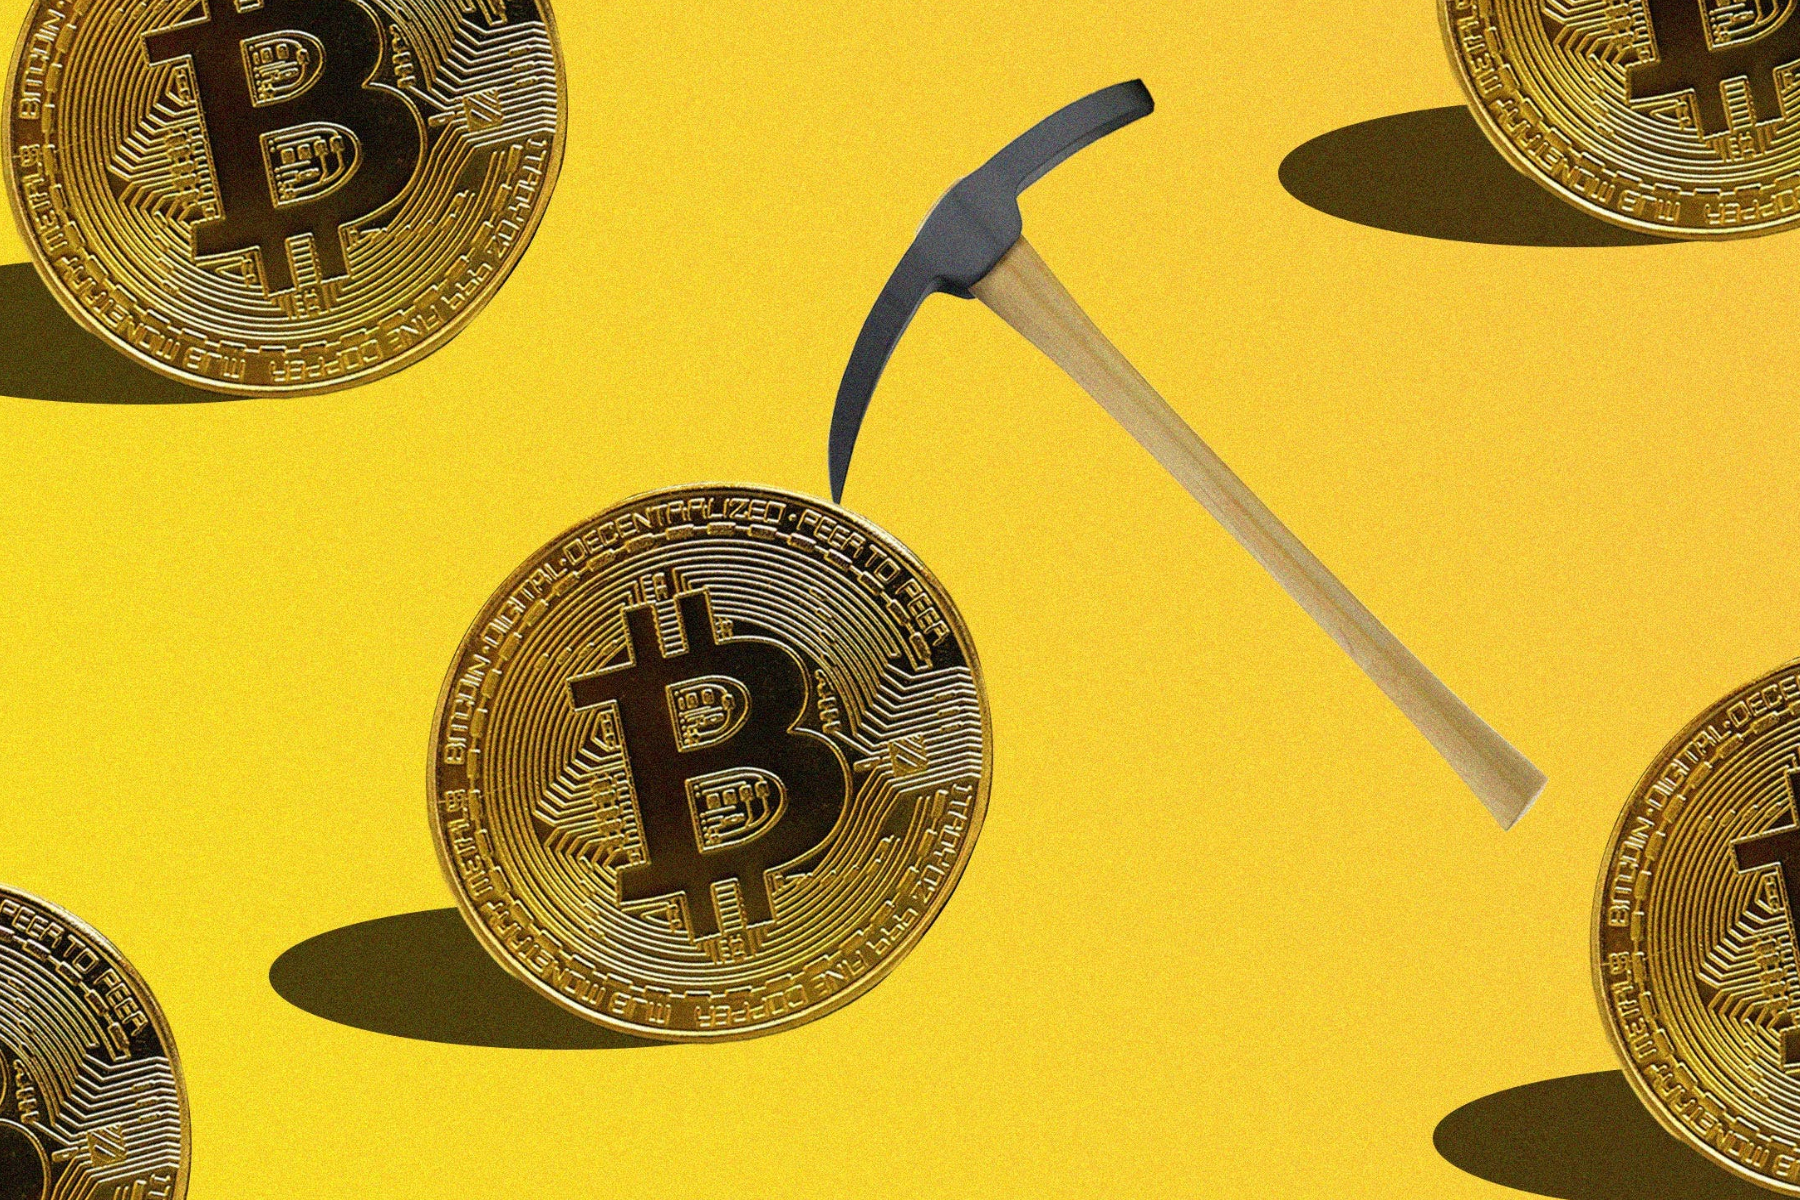 Five Bitcoin and a pickaxe placed on a yellow background